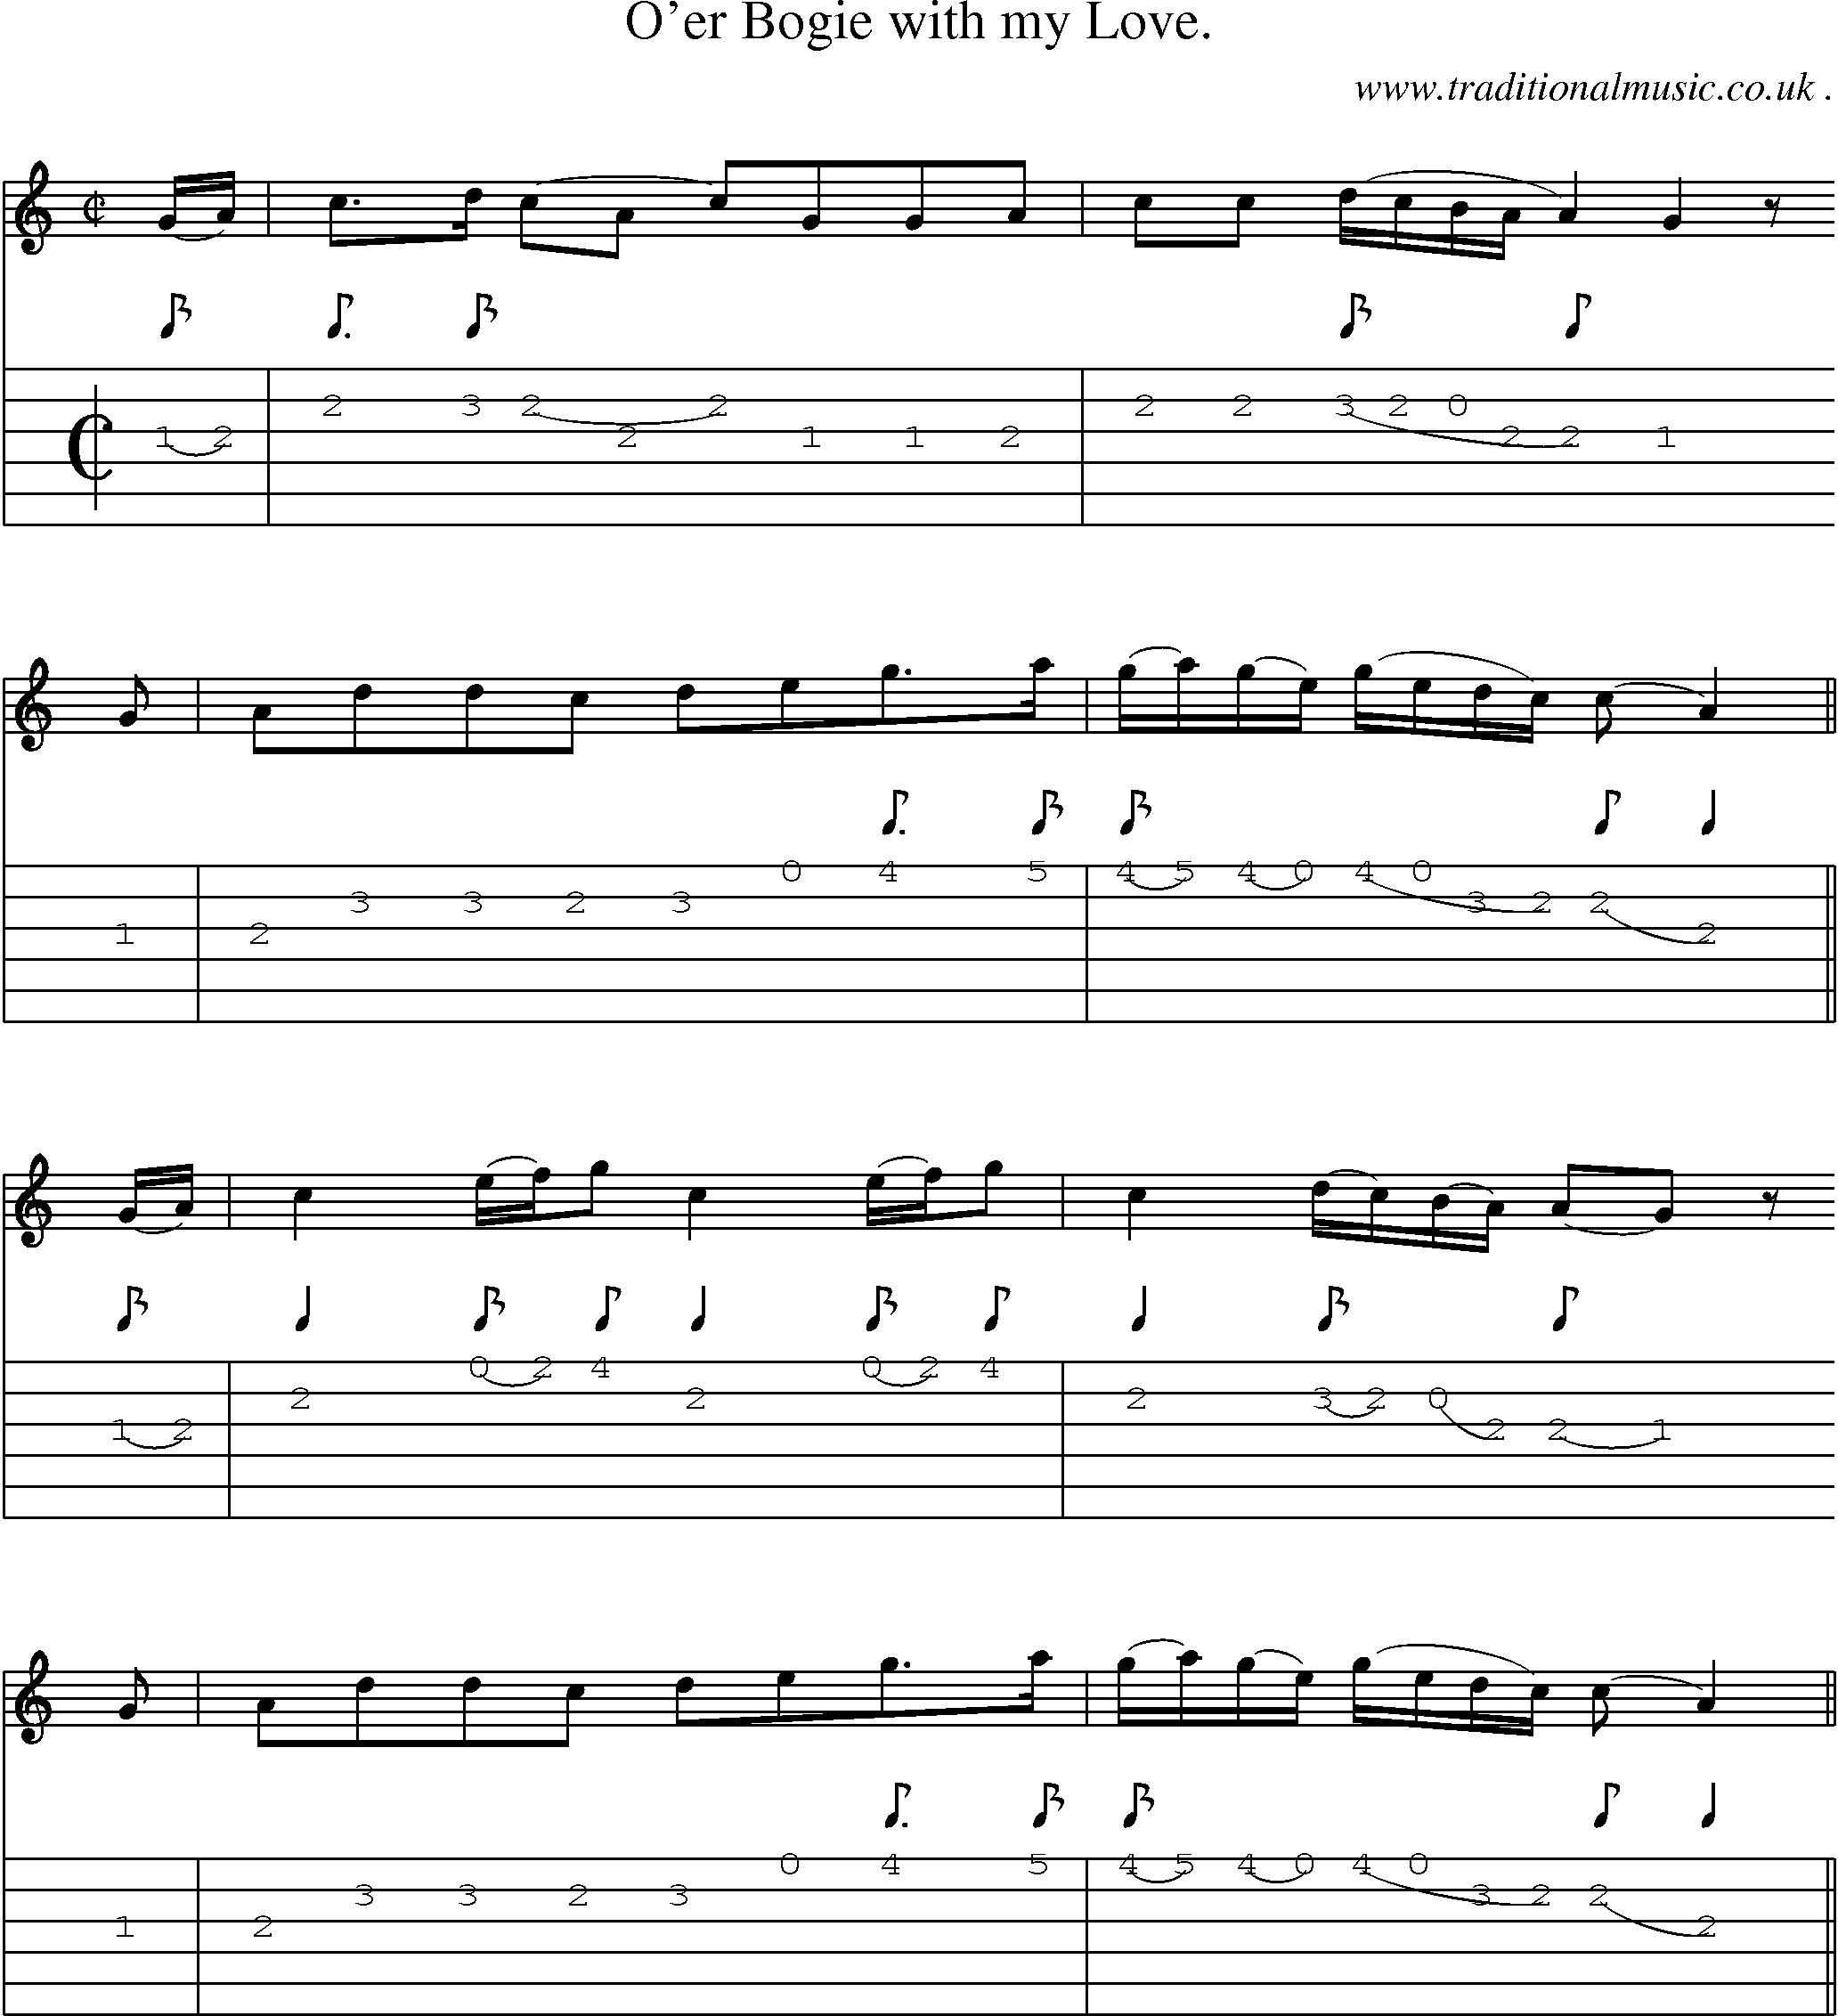 Sheet-Music and Guitar Tabs for Oer Bogie With My Love